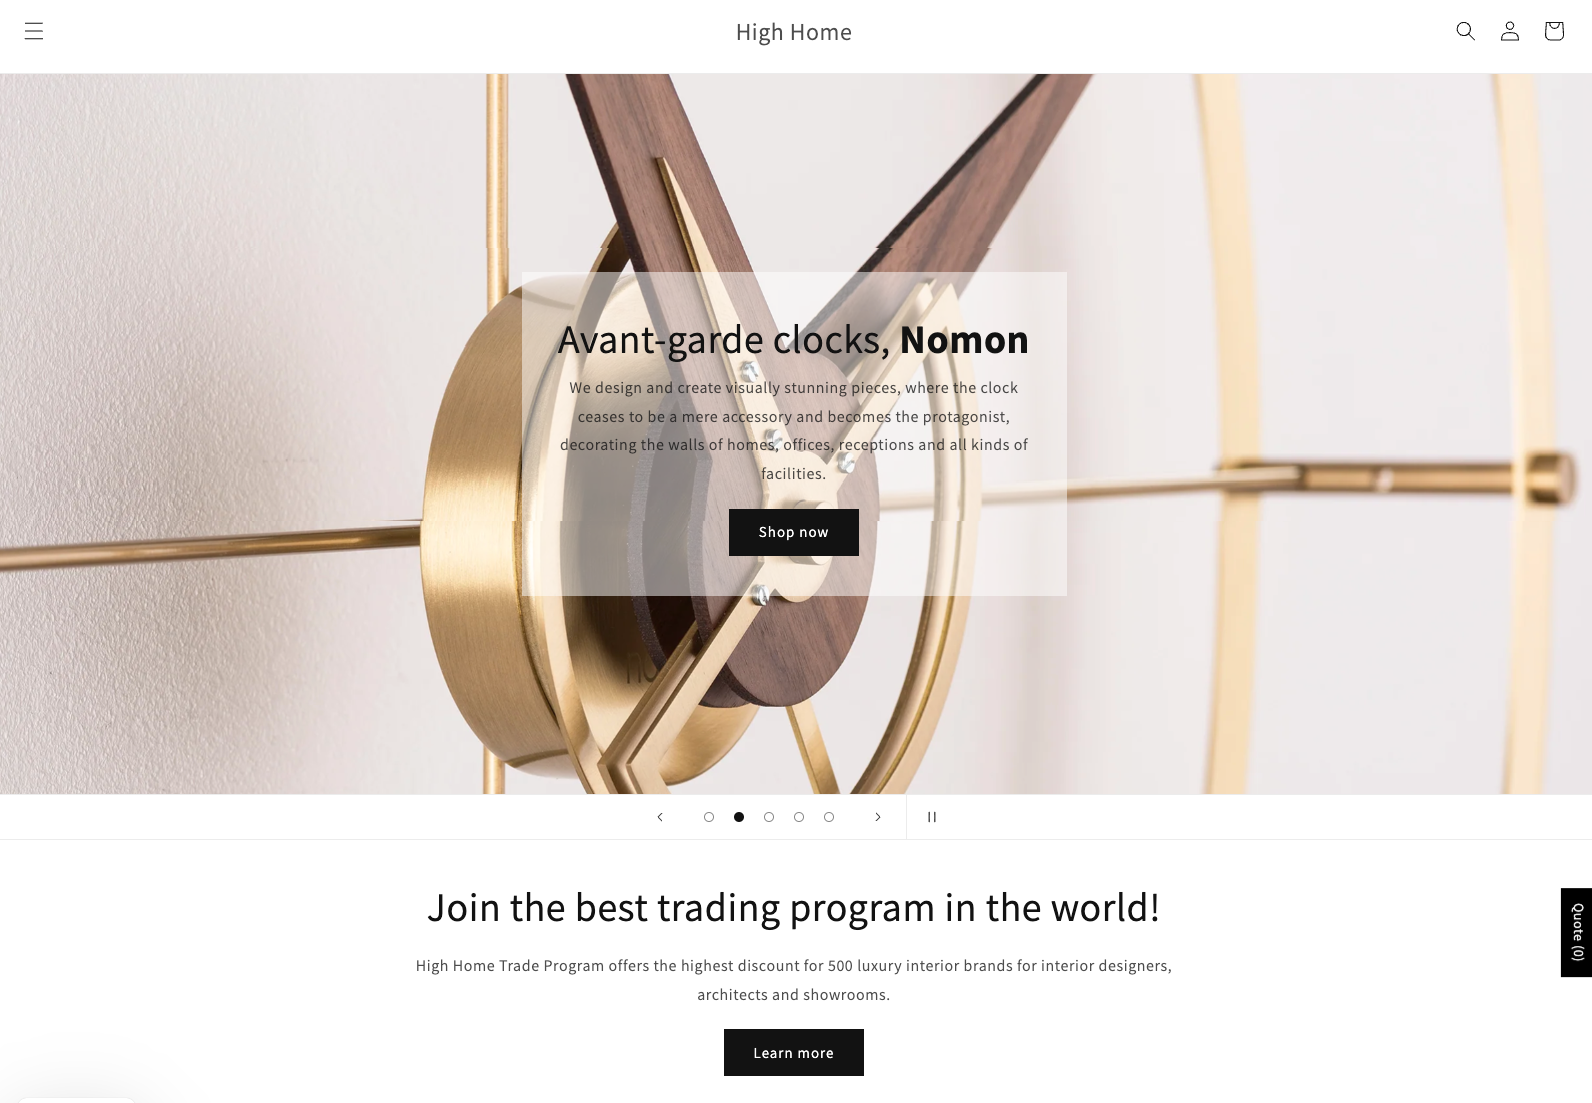 The High Home homepage with a product in the hero image and a trading program CTA below